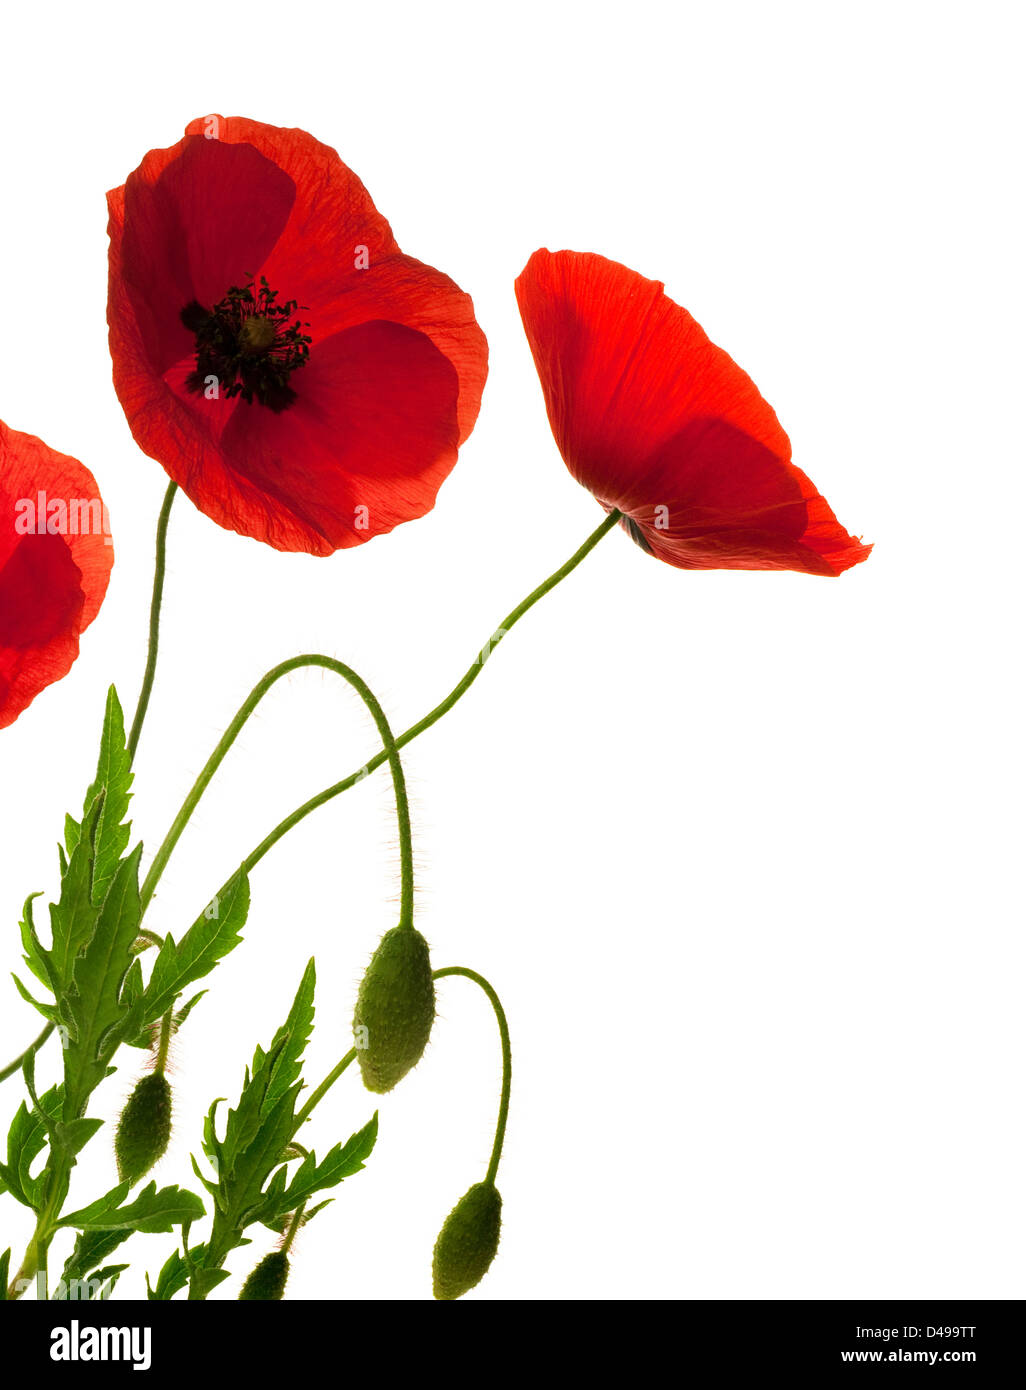 red poppies over white background, border, decorative flowers design Stock Photo